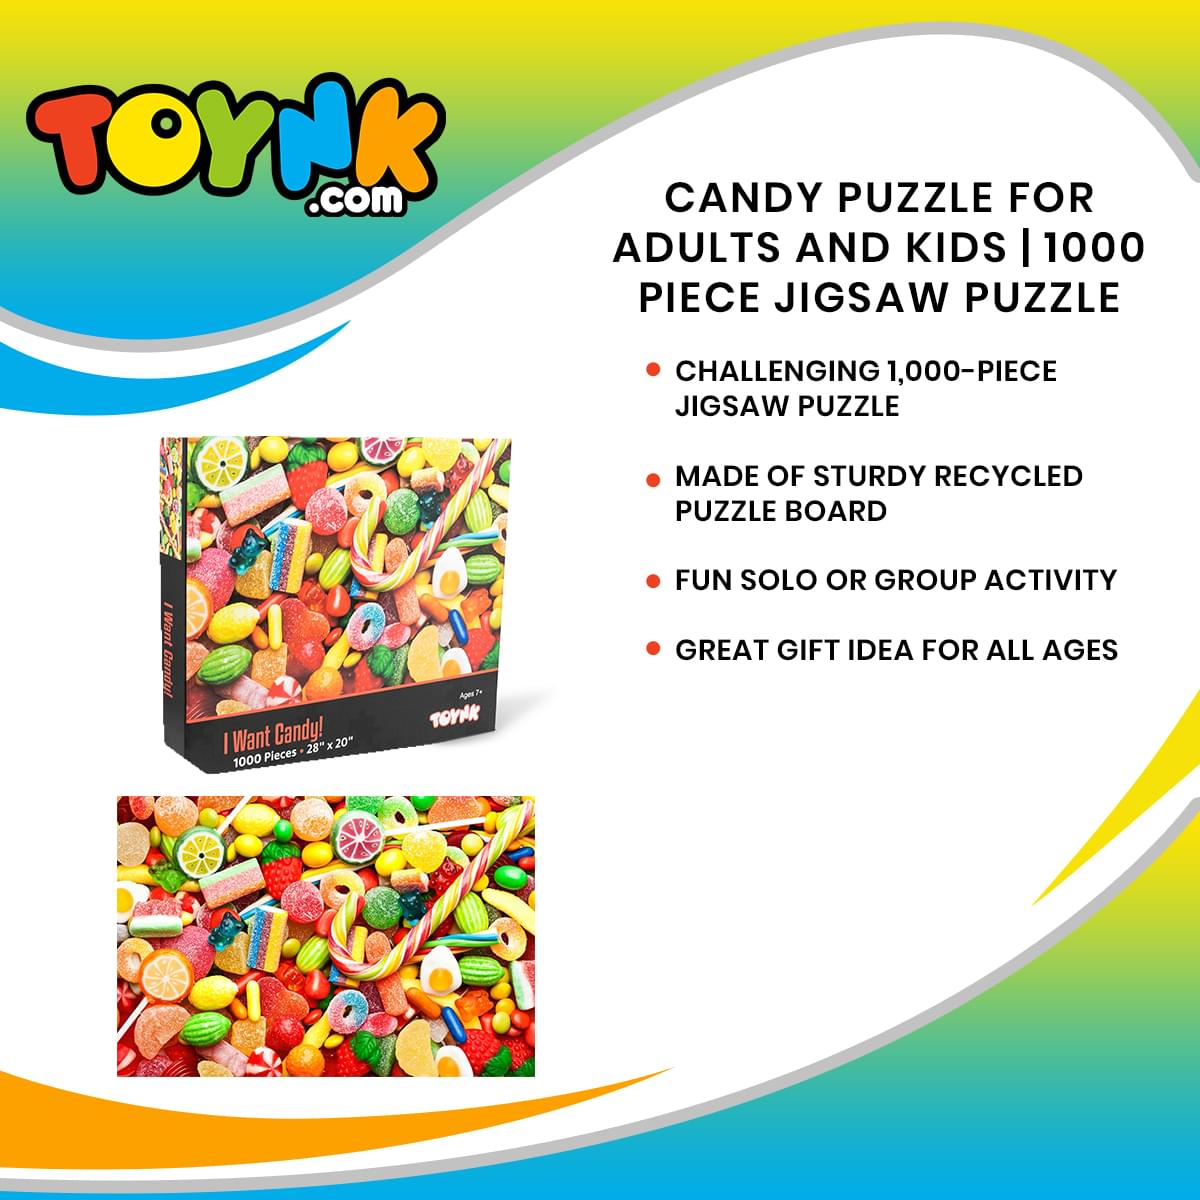 I Want Candy! Sugar Confectionery 1000 Piece Jigsaw Puzzle